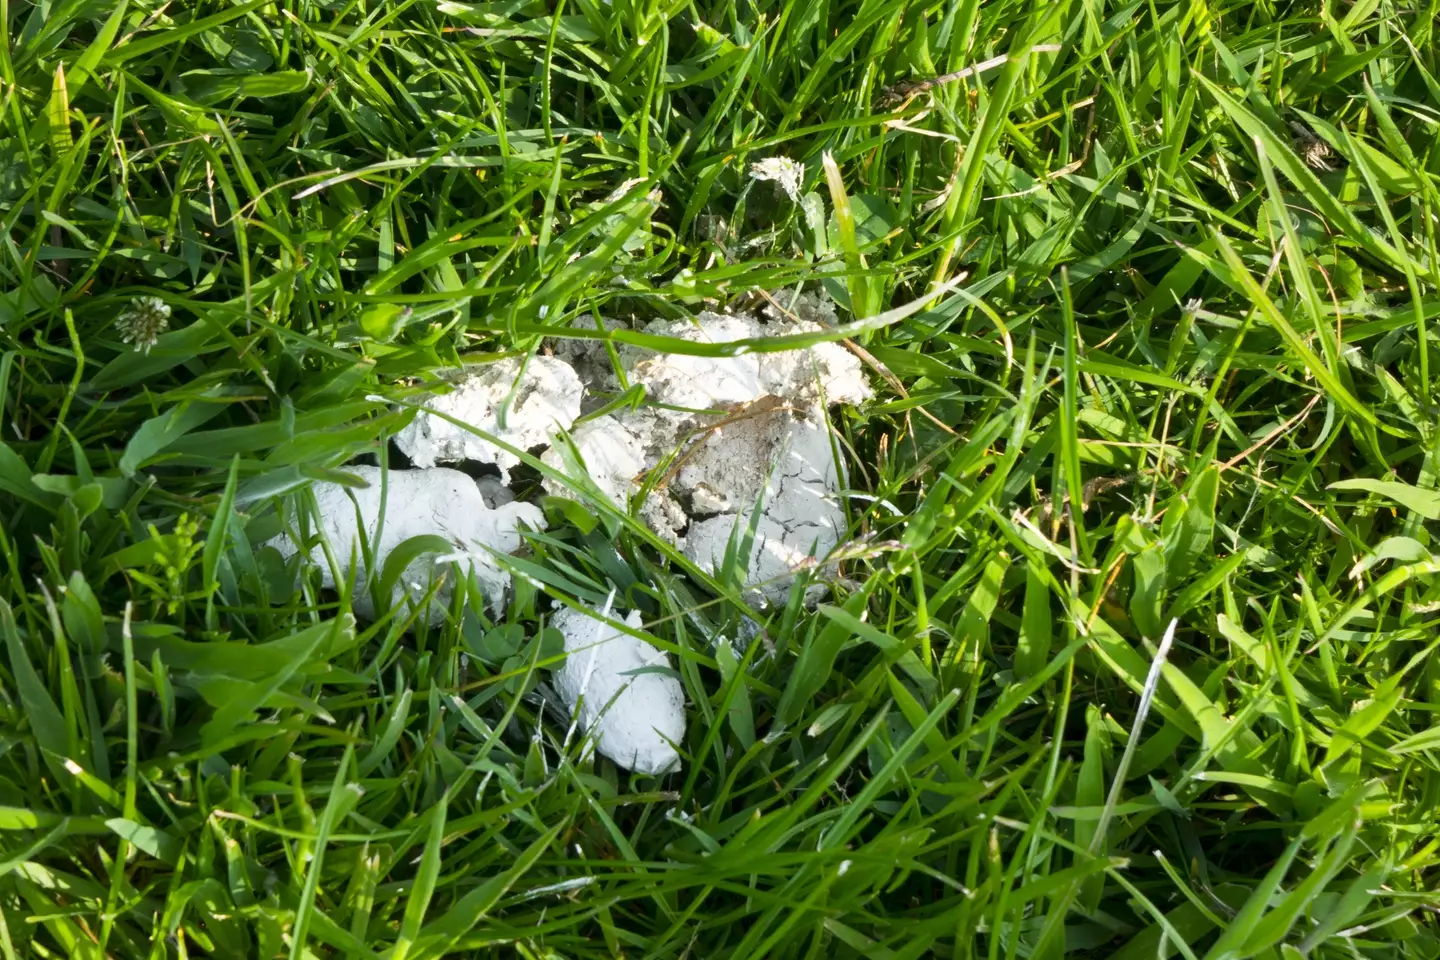 Plenty of people are wondering why we don't see as much white dog poo in parks and fields anymore.